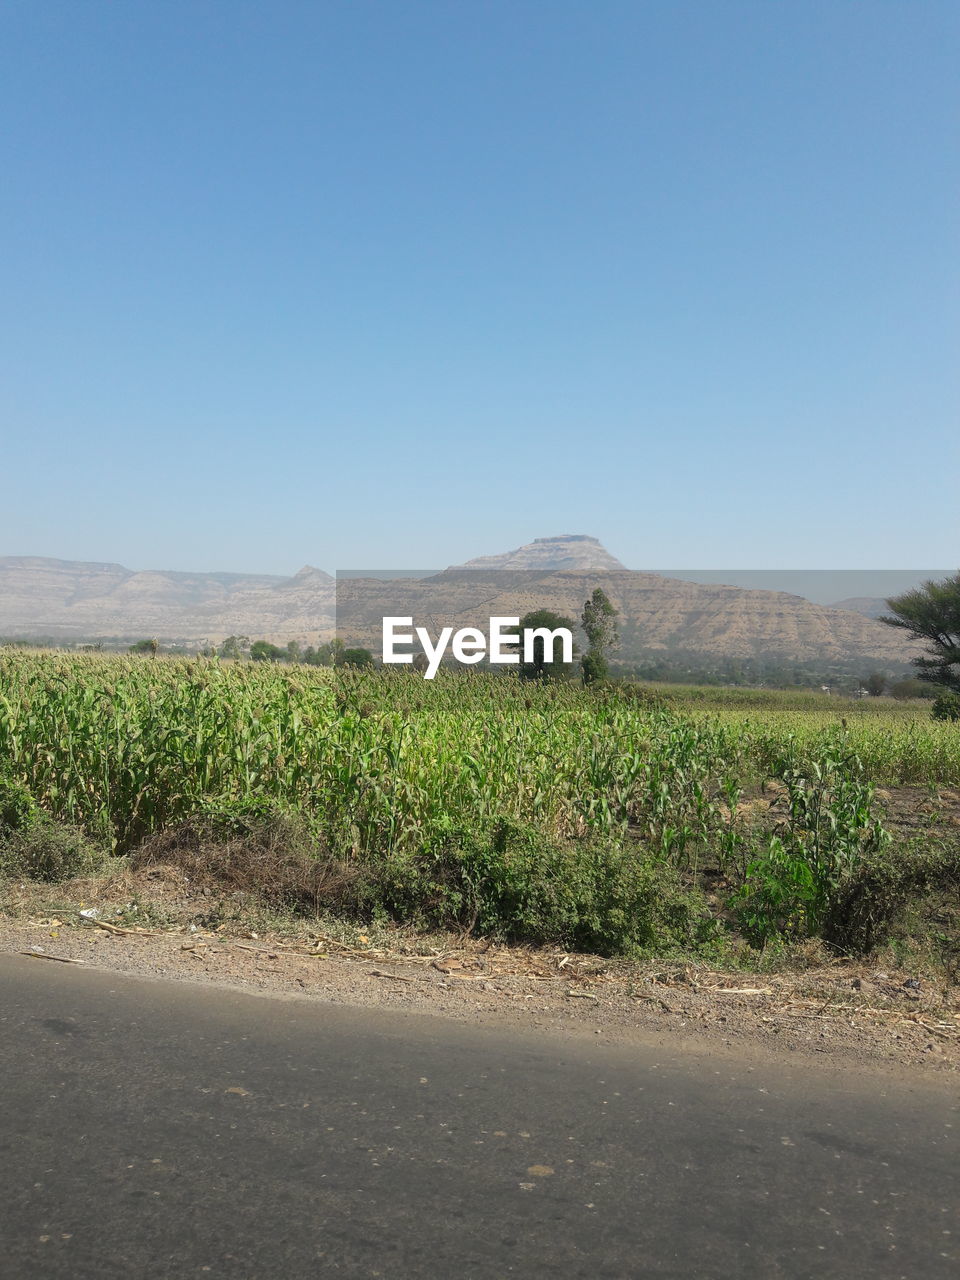 SCENIC VIEW OF LAND AGAINST CLEAR SKY